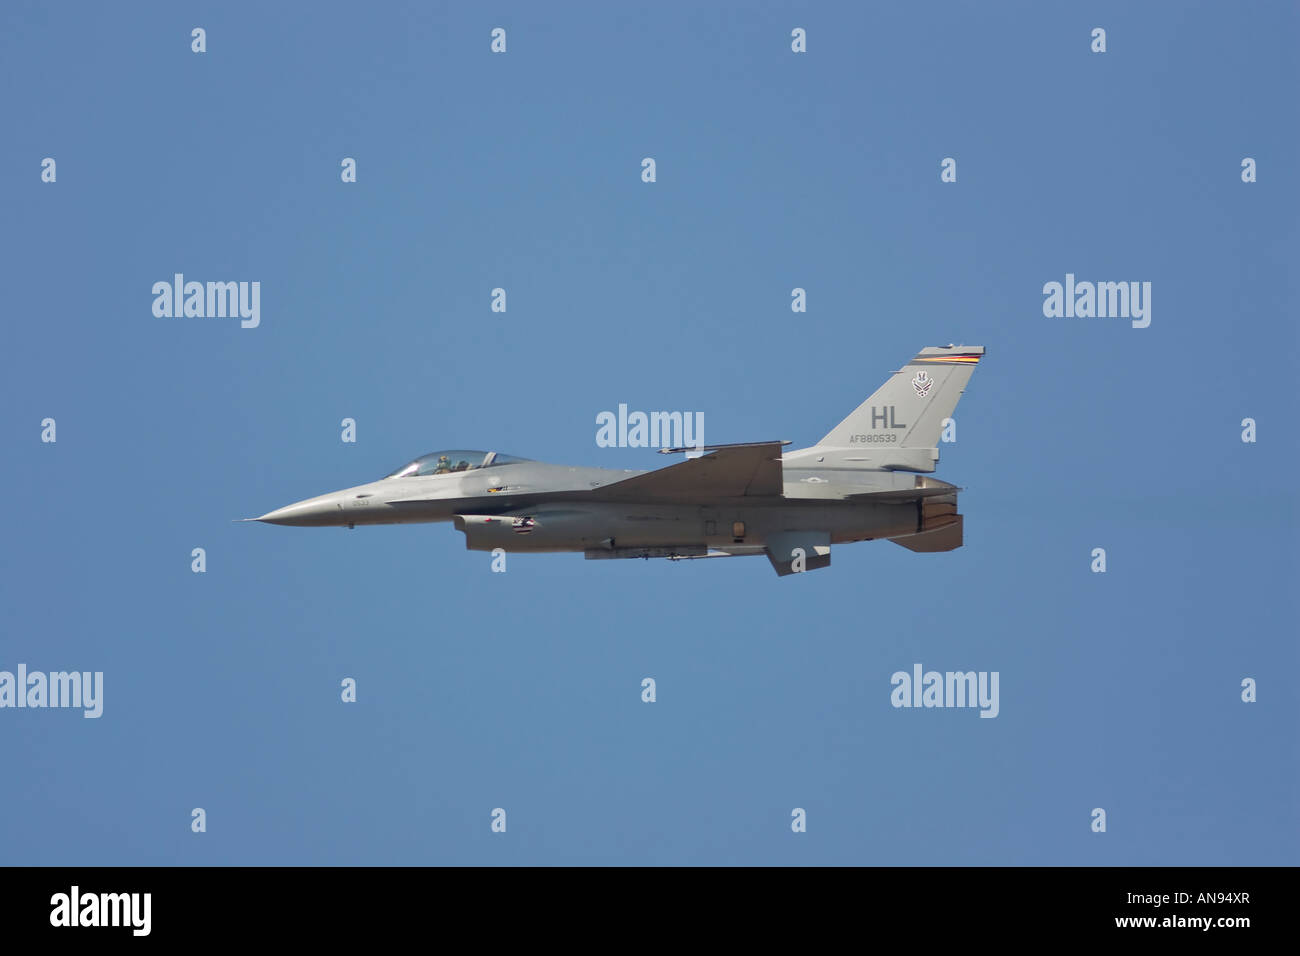 F 16 Fighting Falcon The Viper fly by Stock Photo